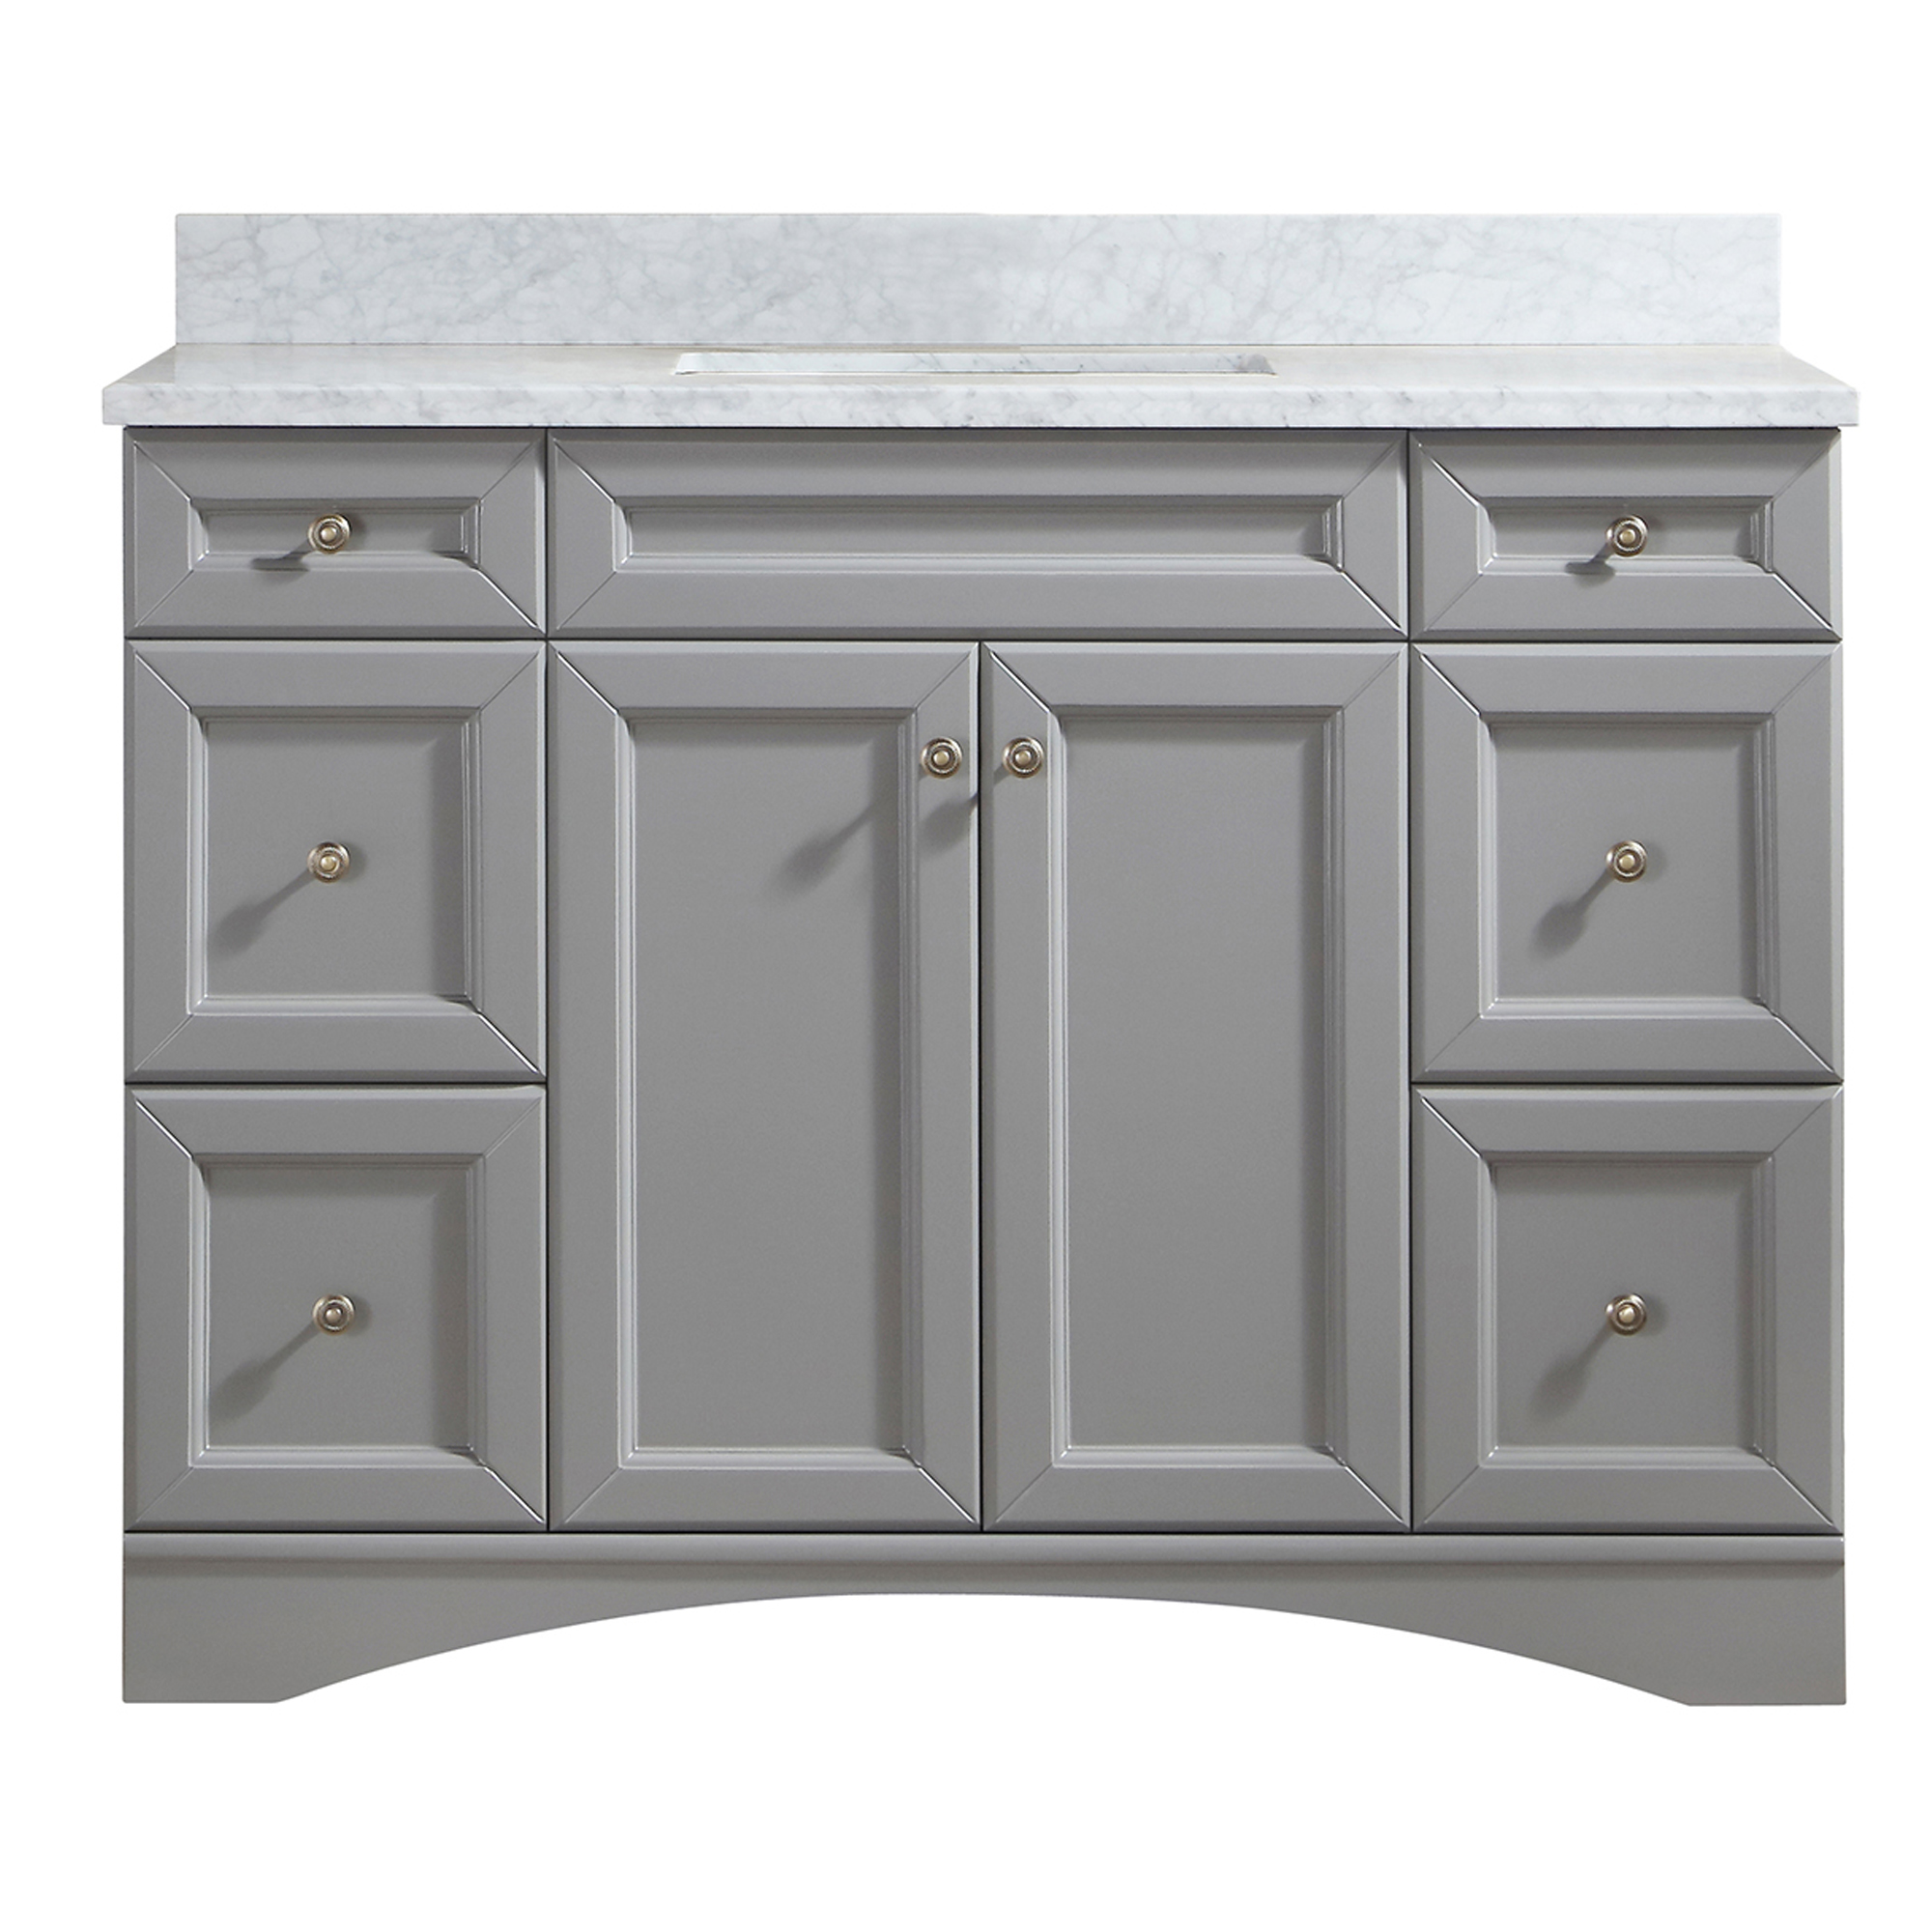 CASAINC Bathroom Vanity 48 x 22 x 35.4with 1.2" Thickness Countertop & Backsplash, Left Rectangular Sink, 2 Soft Closing Doors, 6 Dove Tail Drawer Construction, Soft Close Drawer Hinges, Gray, White (With Mirror)